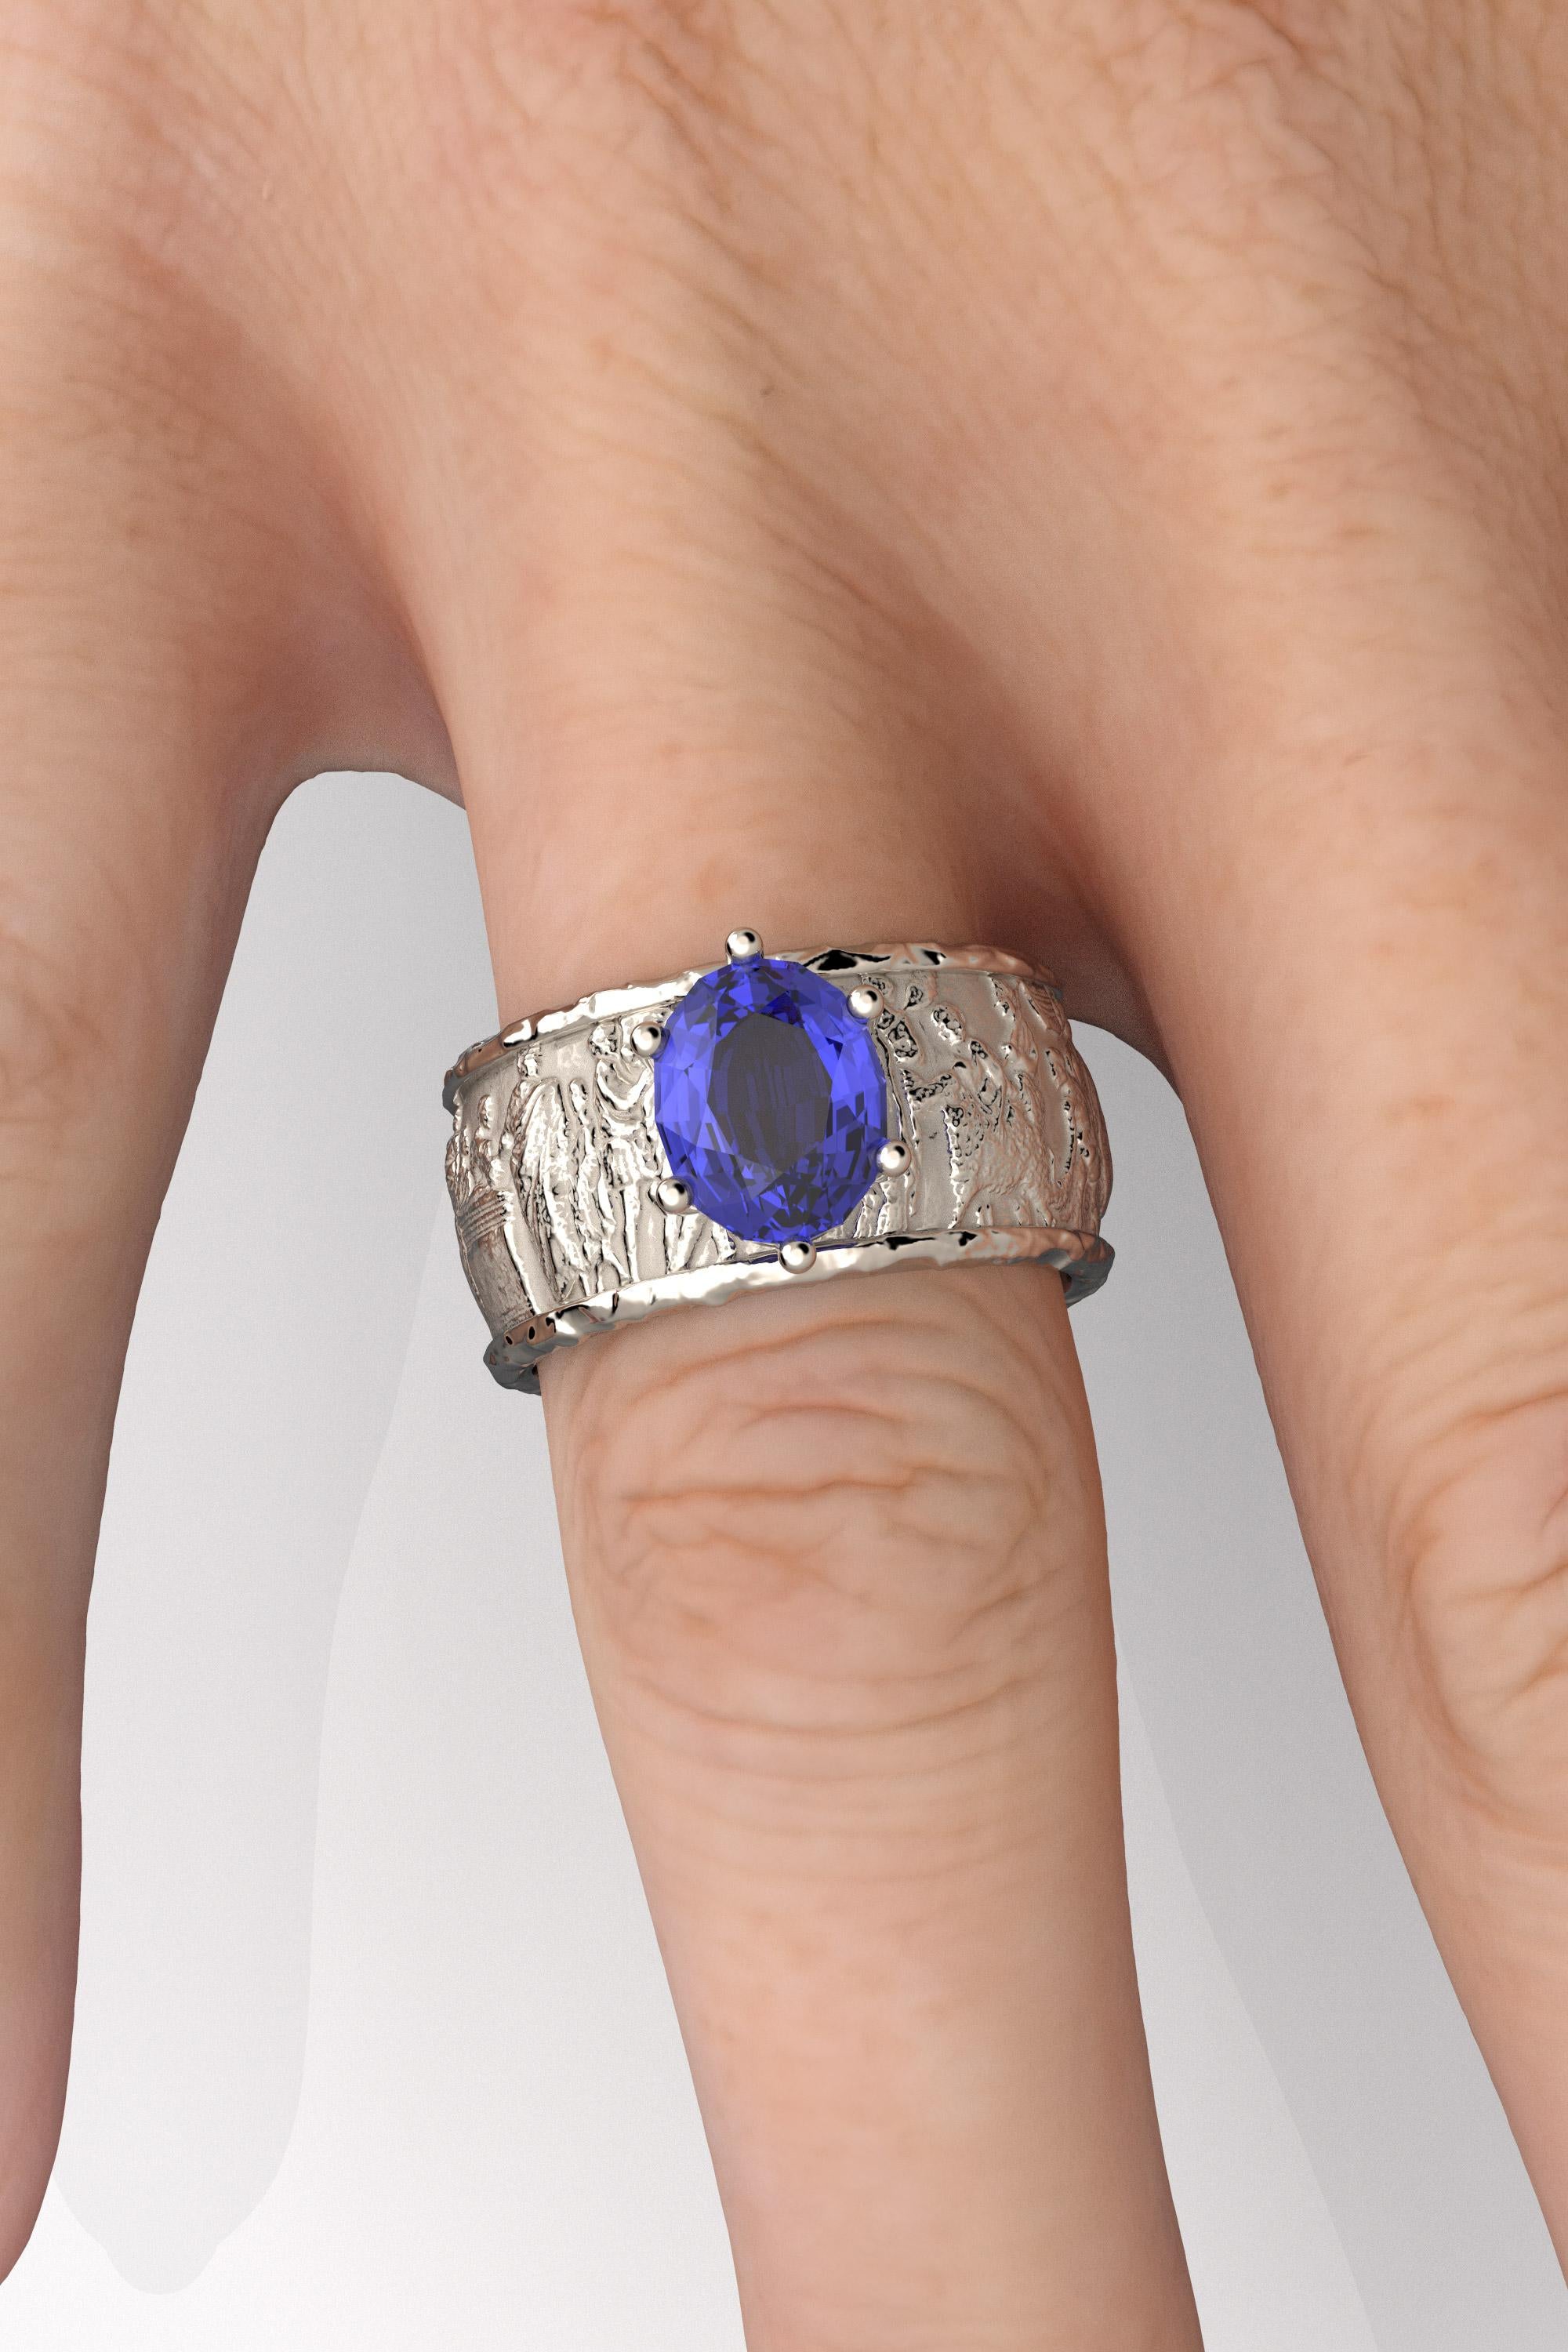 For Sale:  Tanzanite gold ring in 18k solid gold by Oltremare Gioielli made in Italy. 10